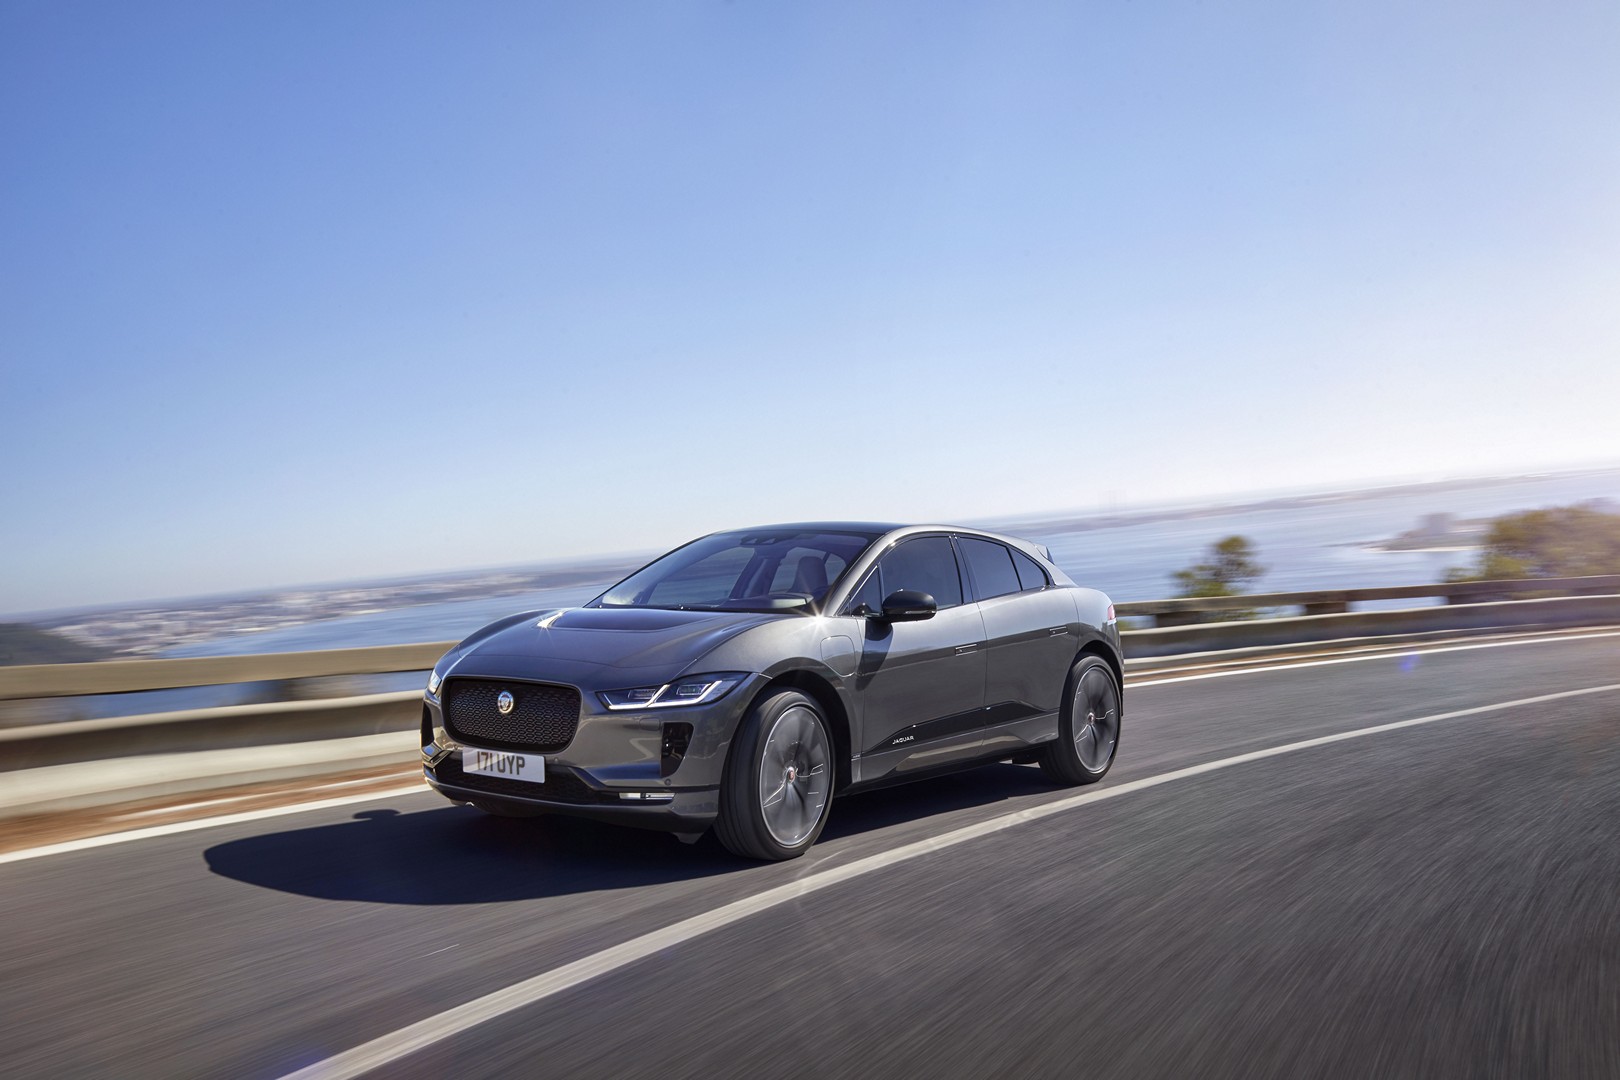 https://s1.cdn.autoevolution.com/images/news/gallery/2020-jaguar-i-pace-update-offers-234-miles-of-range-thanks-to-etrophy-know-how_58.jpg